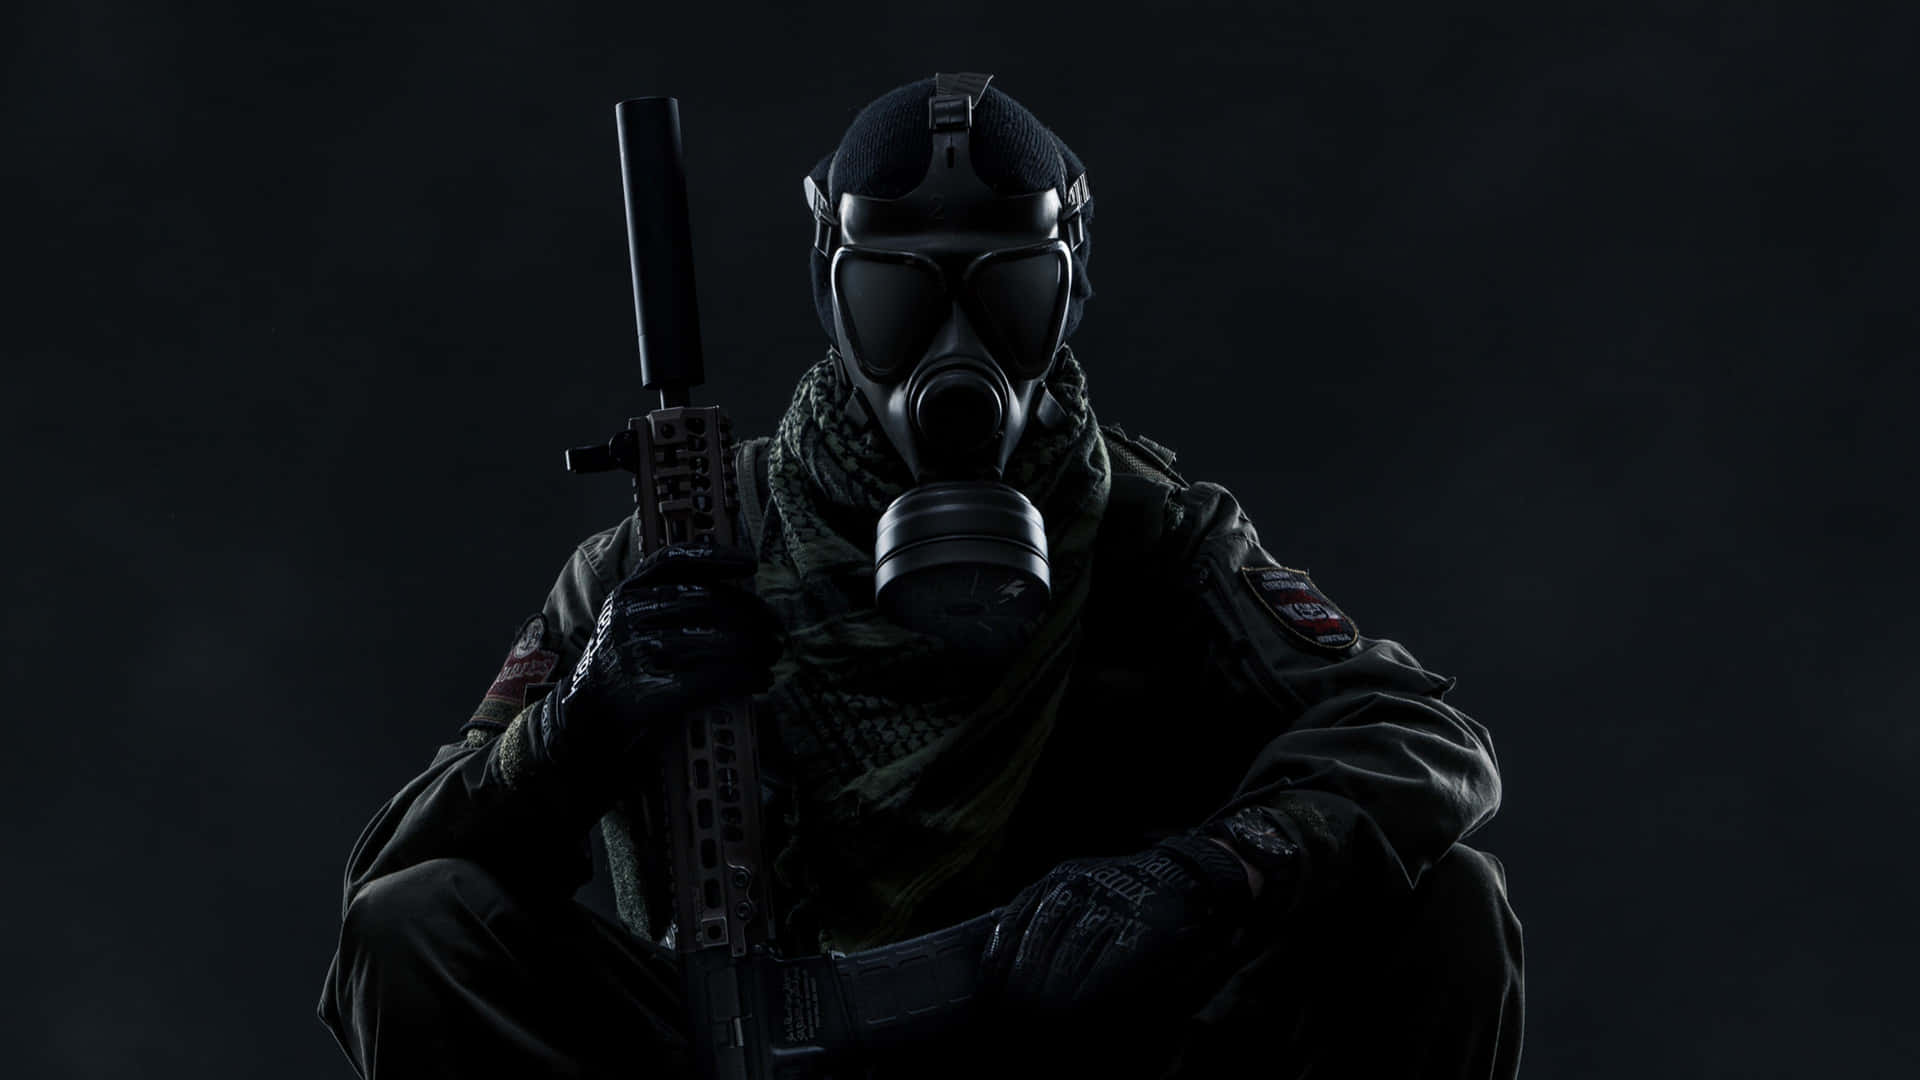 Tactical Soldier Gas Mask Wallpaper